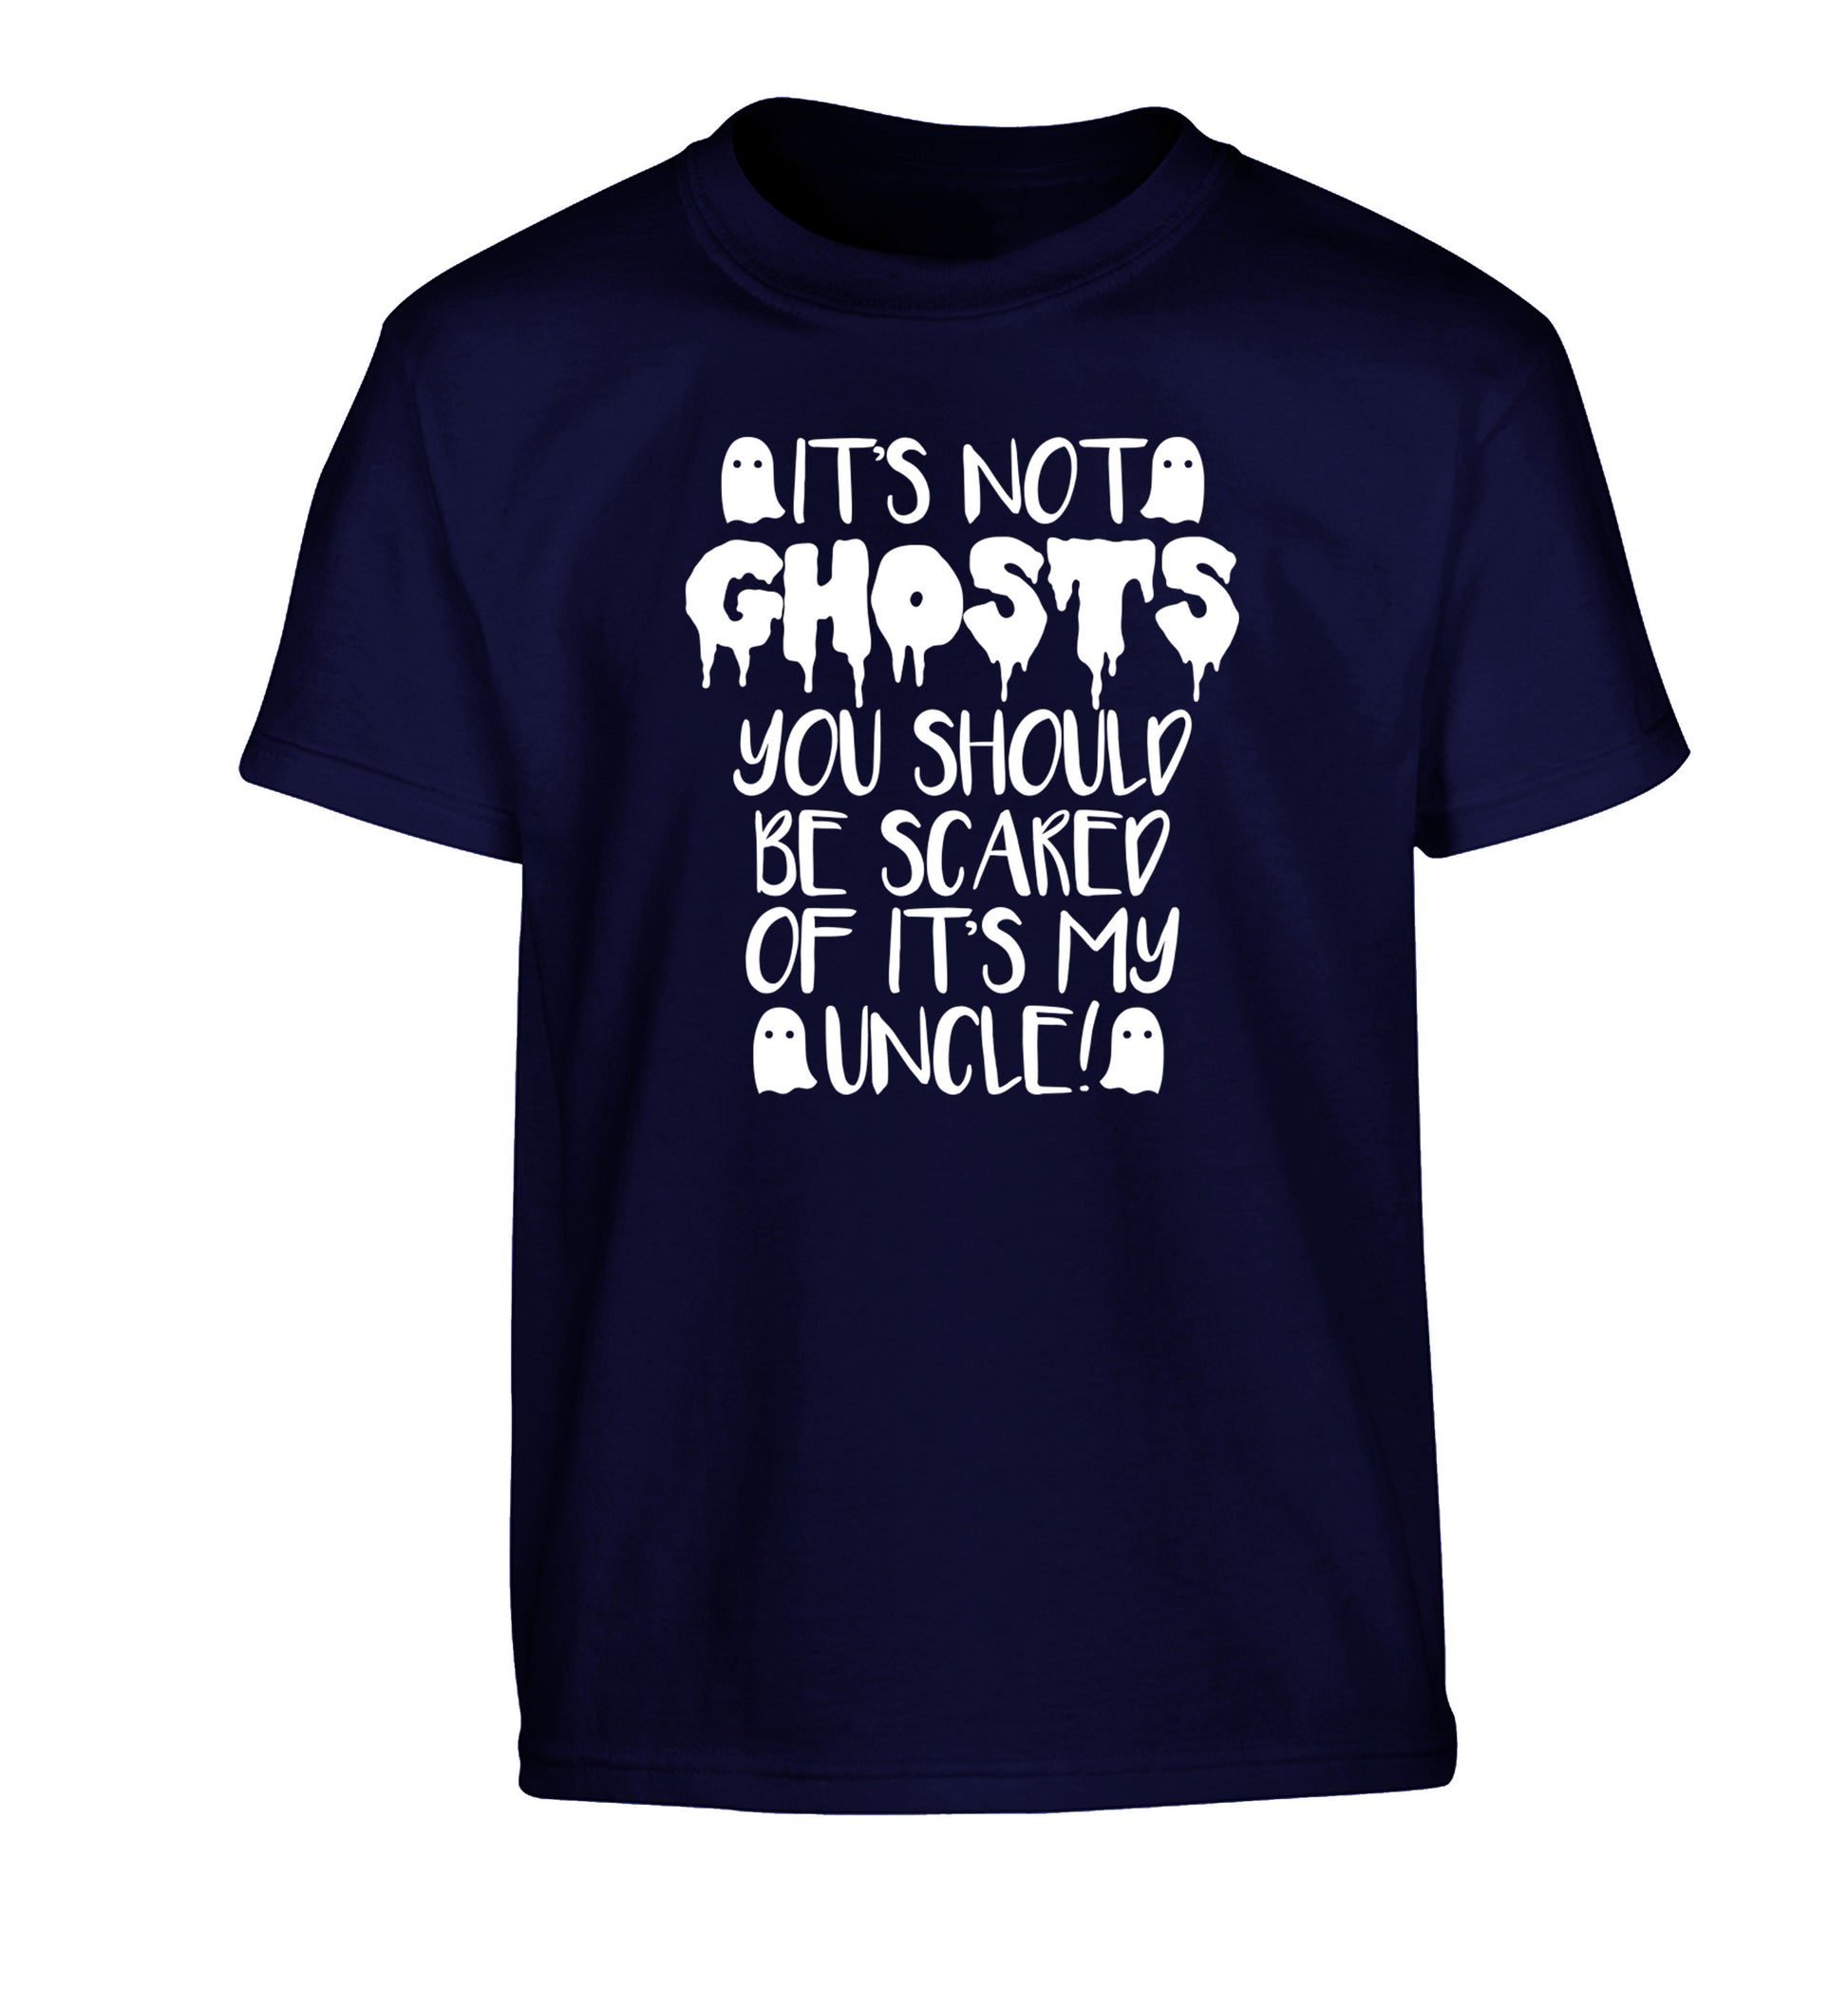 It's not ghosts you should be scared of it's my uncle! Children's navy Tshirt 12-14 Years